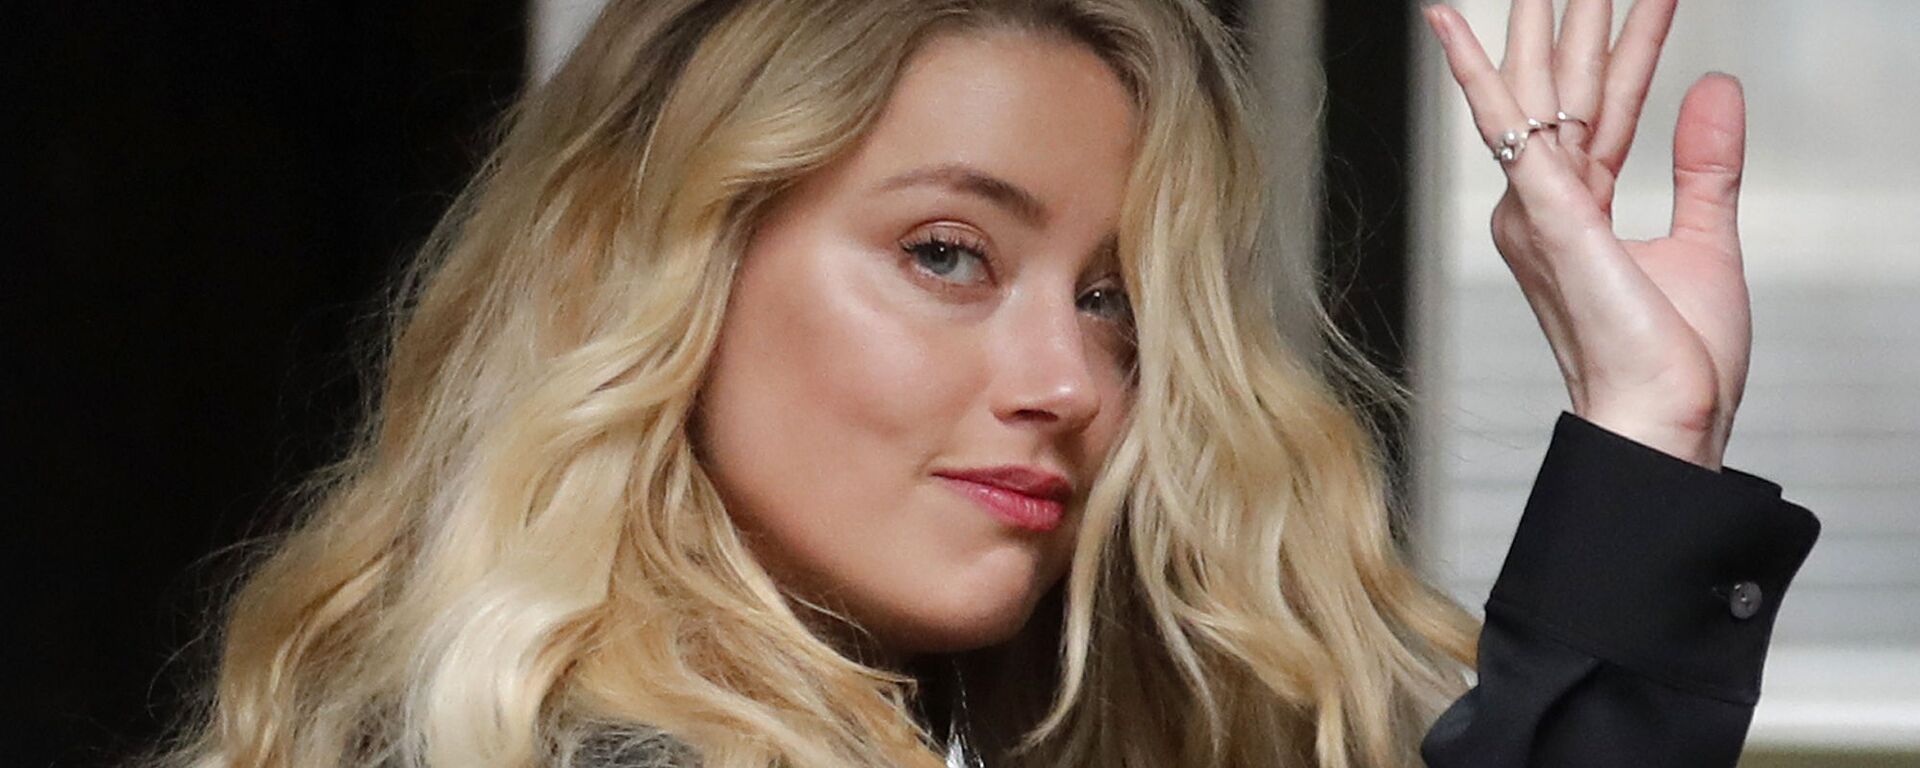 US Actress Amber Heard, former wife of actor Johnny Depp, arrives at the High Court in London, Tuesday, July 28, 2020.  - Sputnik International, 1920, 18.03.2021